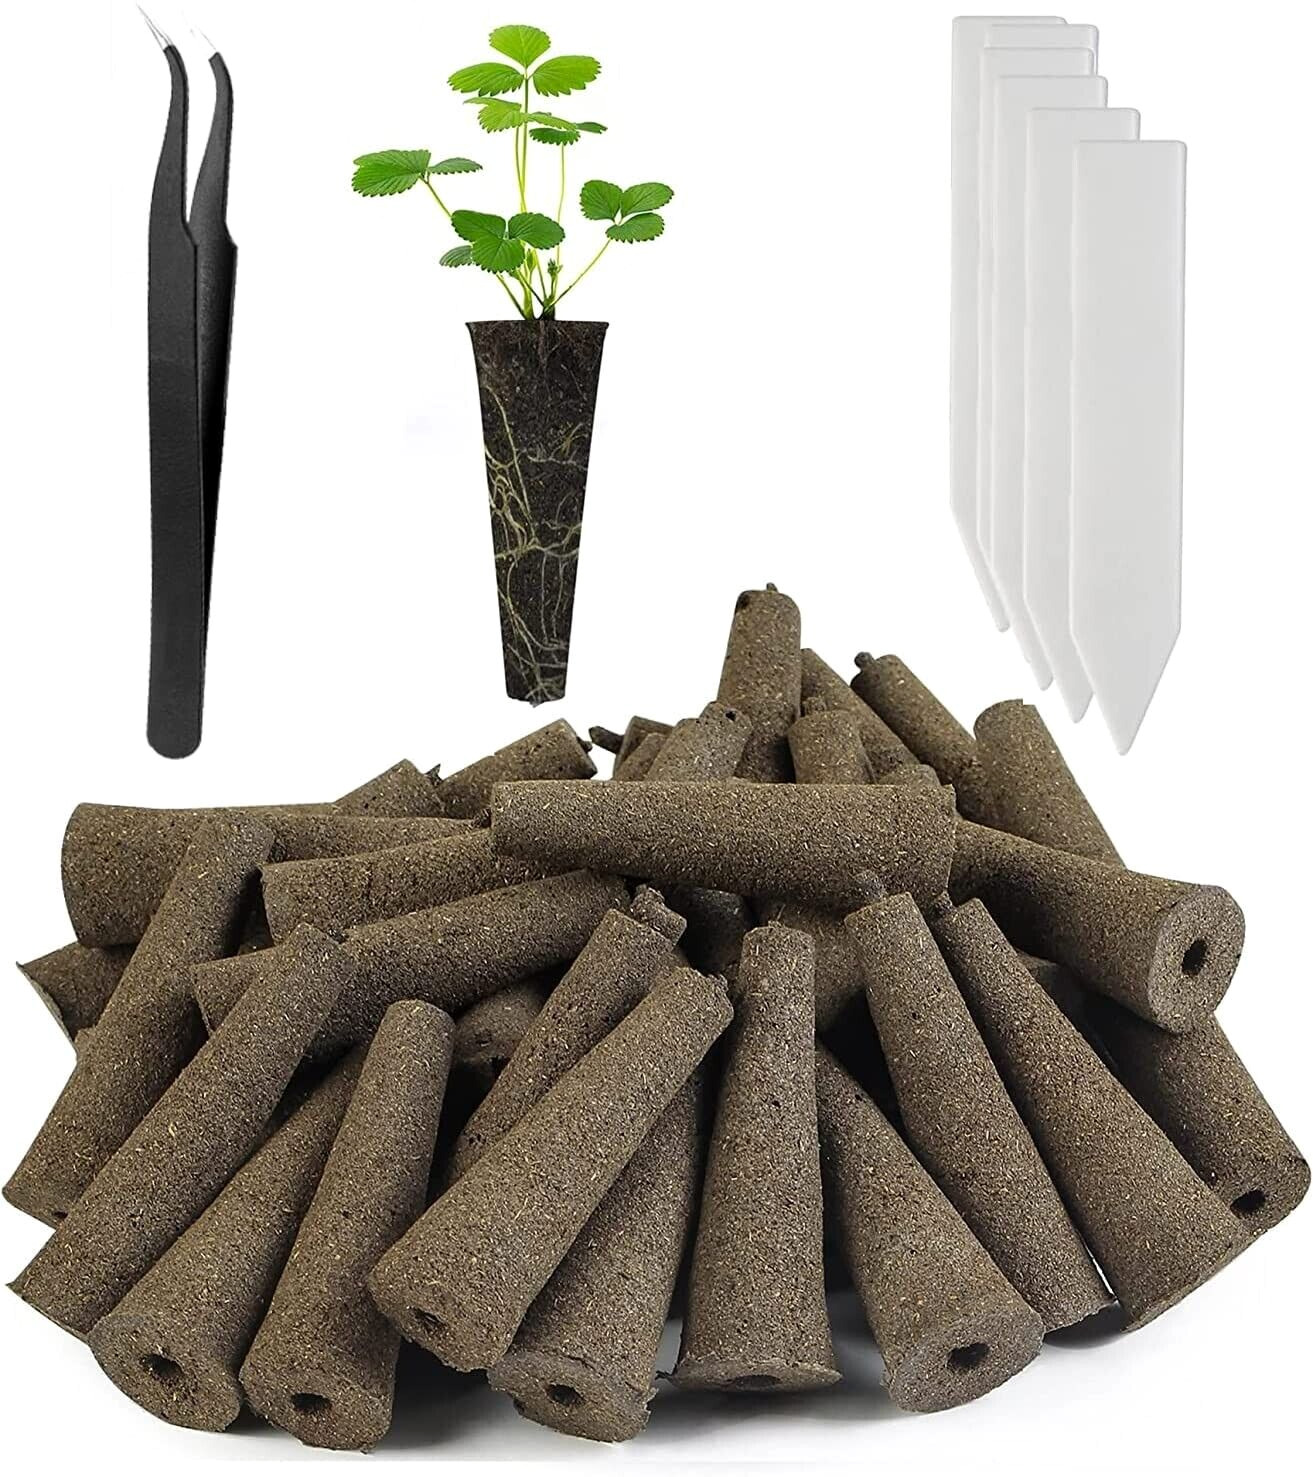 30 Pack Root Grow Sponges Seed Pods Compatible with Aerogarden for Hydroponic